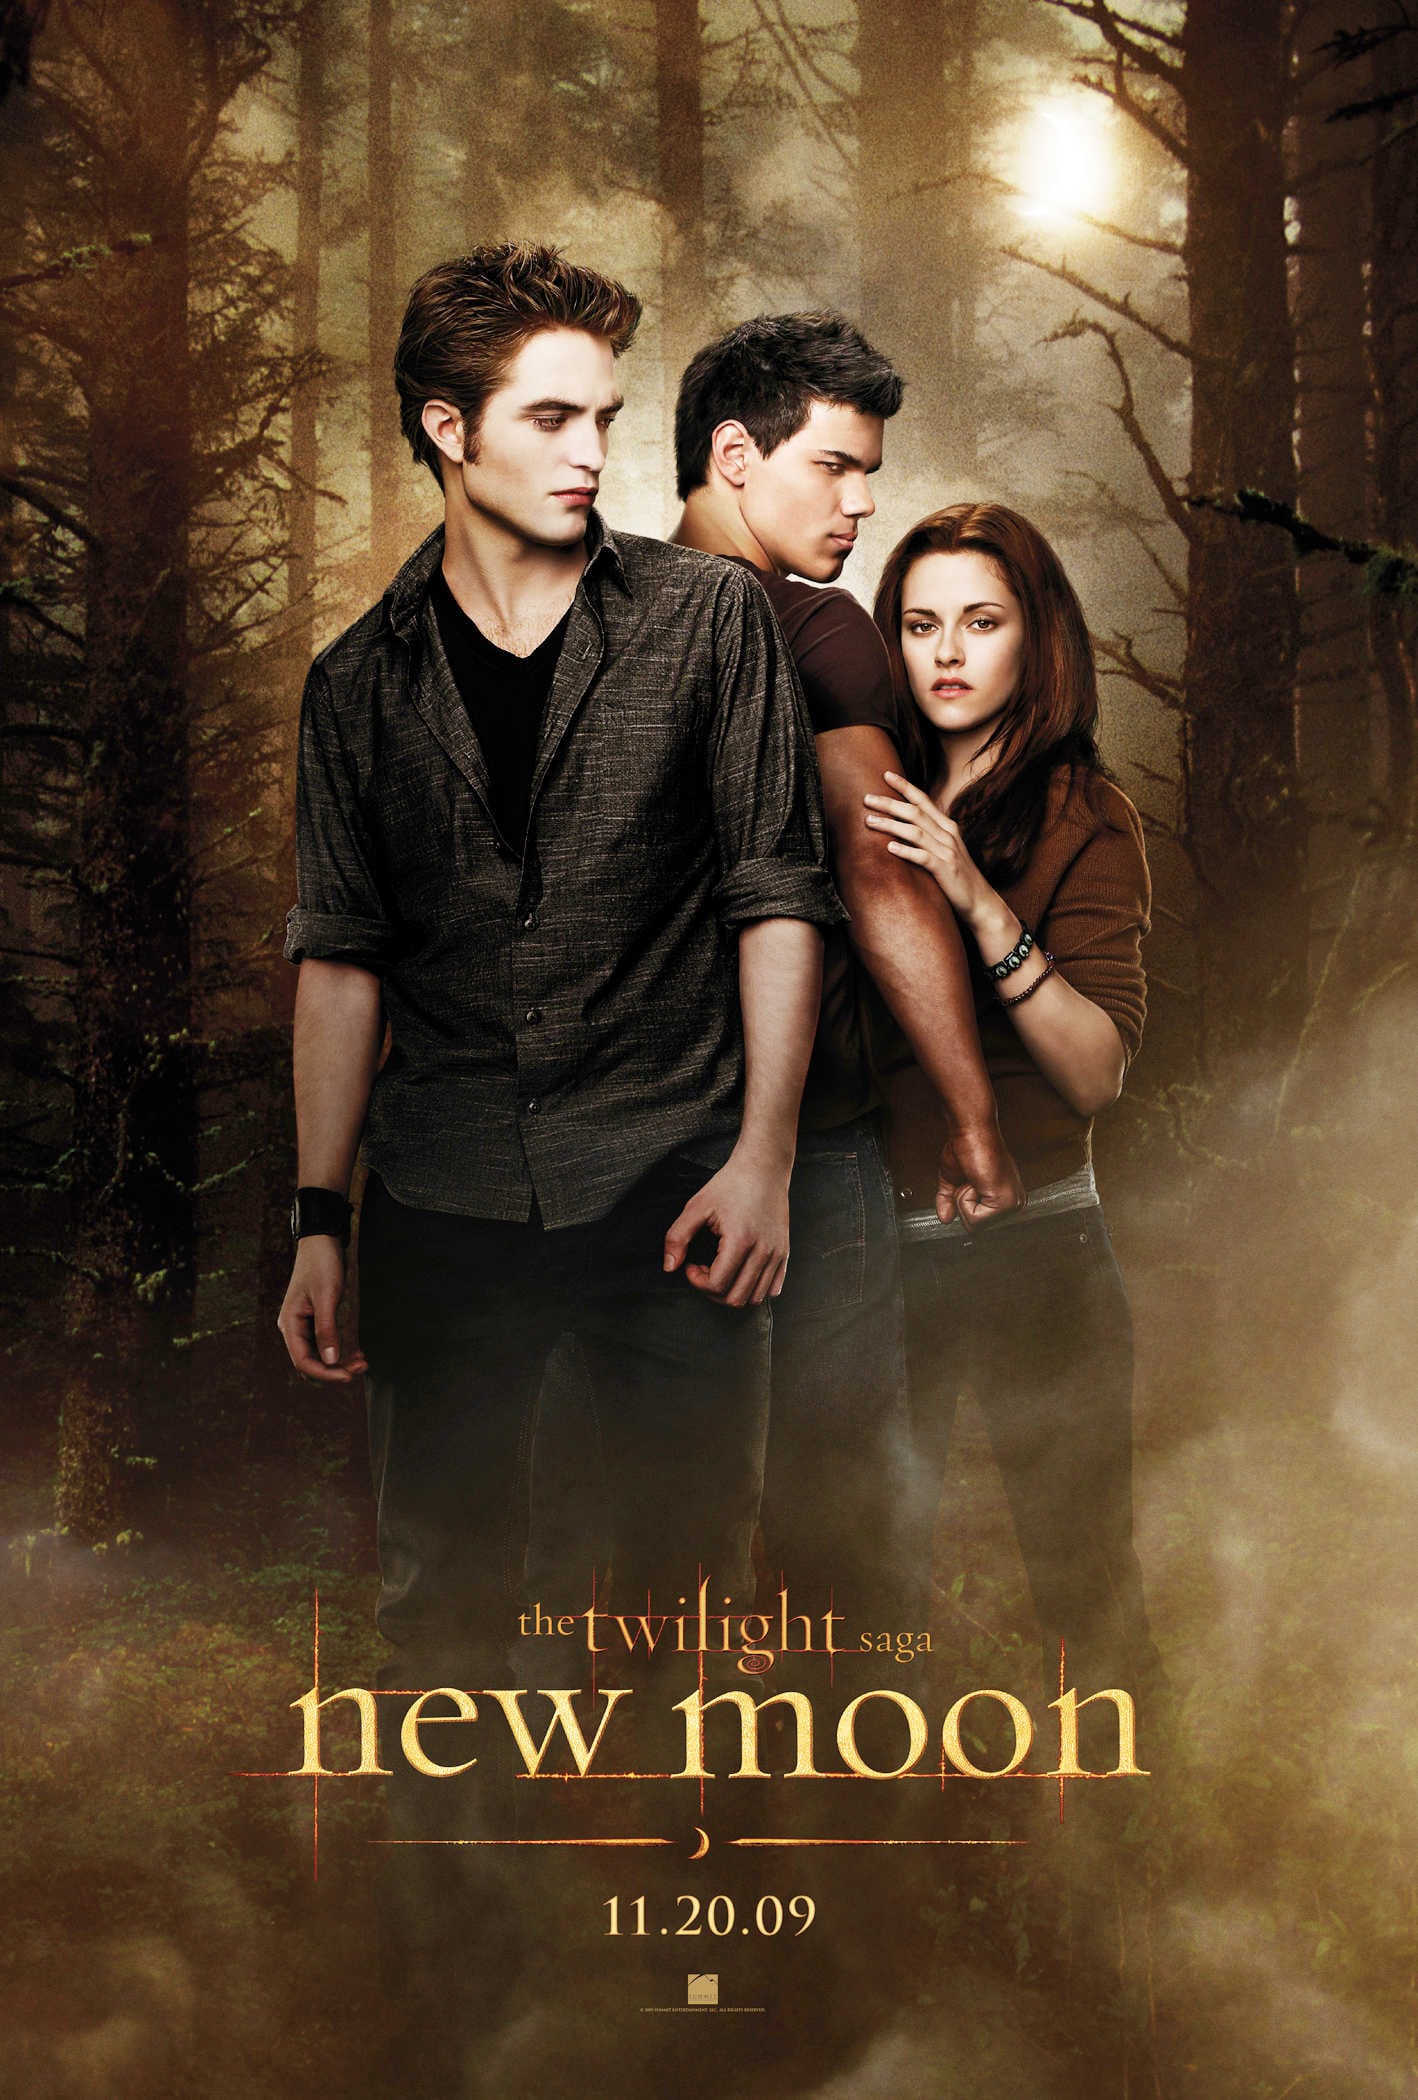 THE TWILIGHT SAGA: NEW MOON - Movieguide | Movie Reviews for Christians